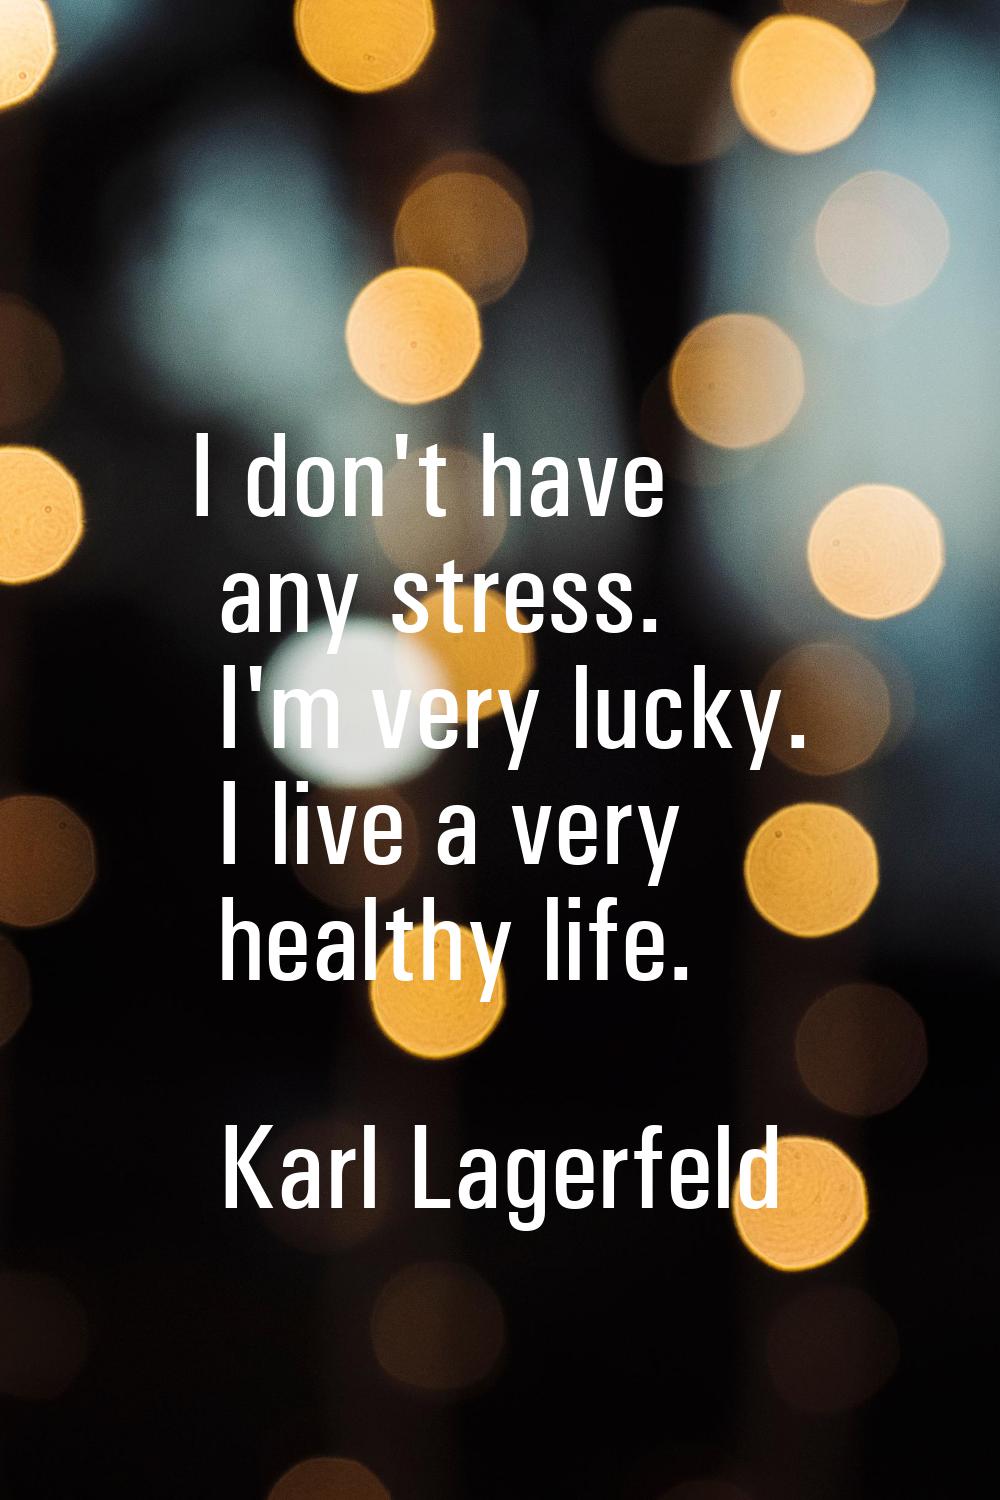 I don't have any stress. I'm very lucky. I live a very healthy life.